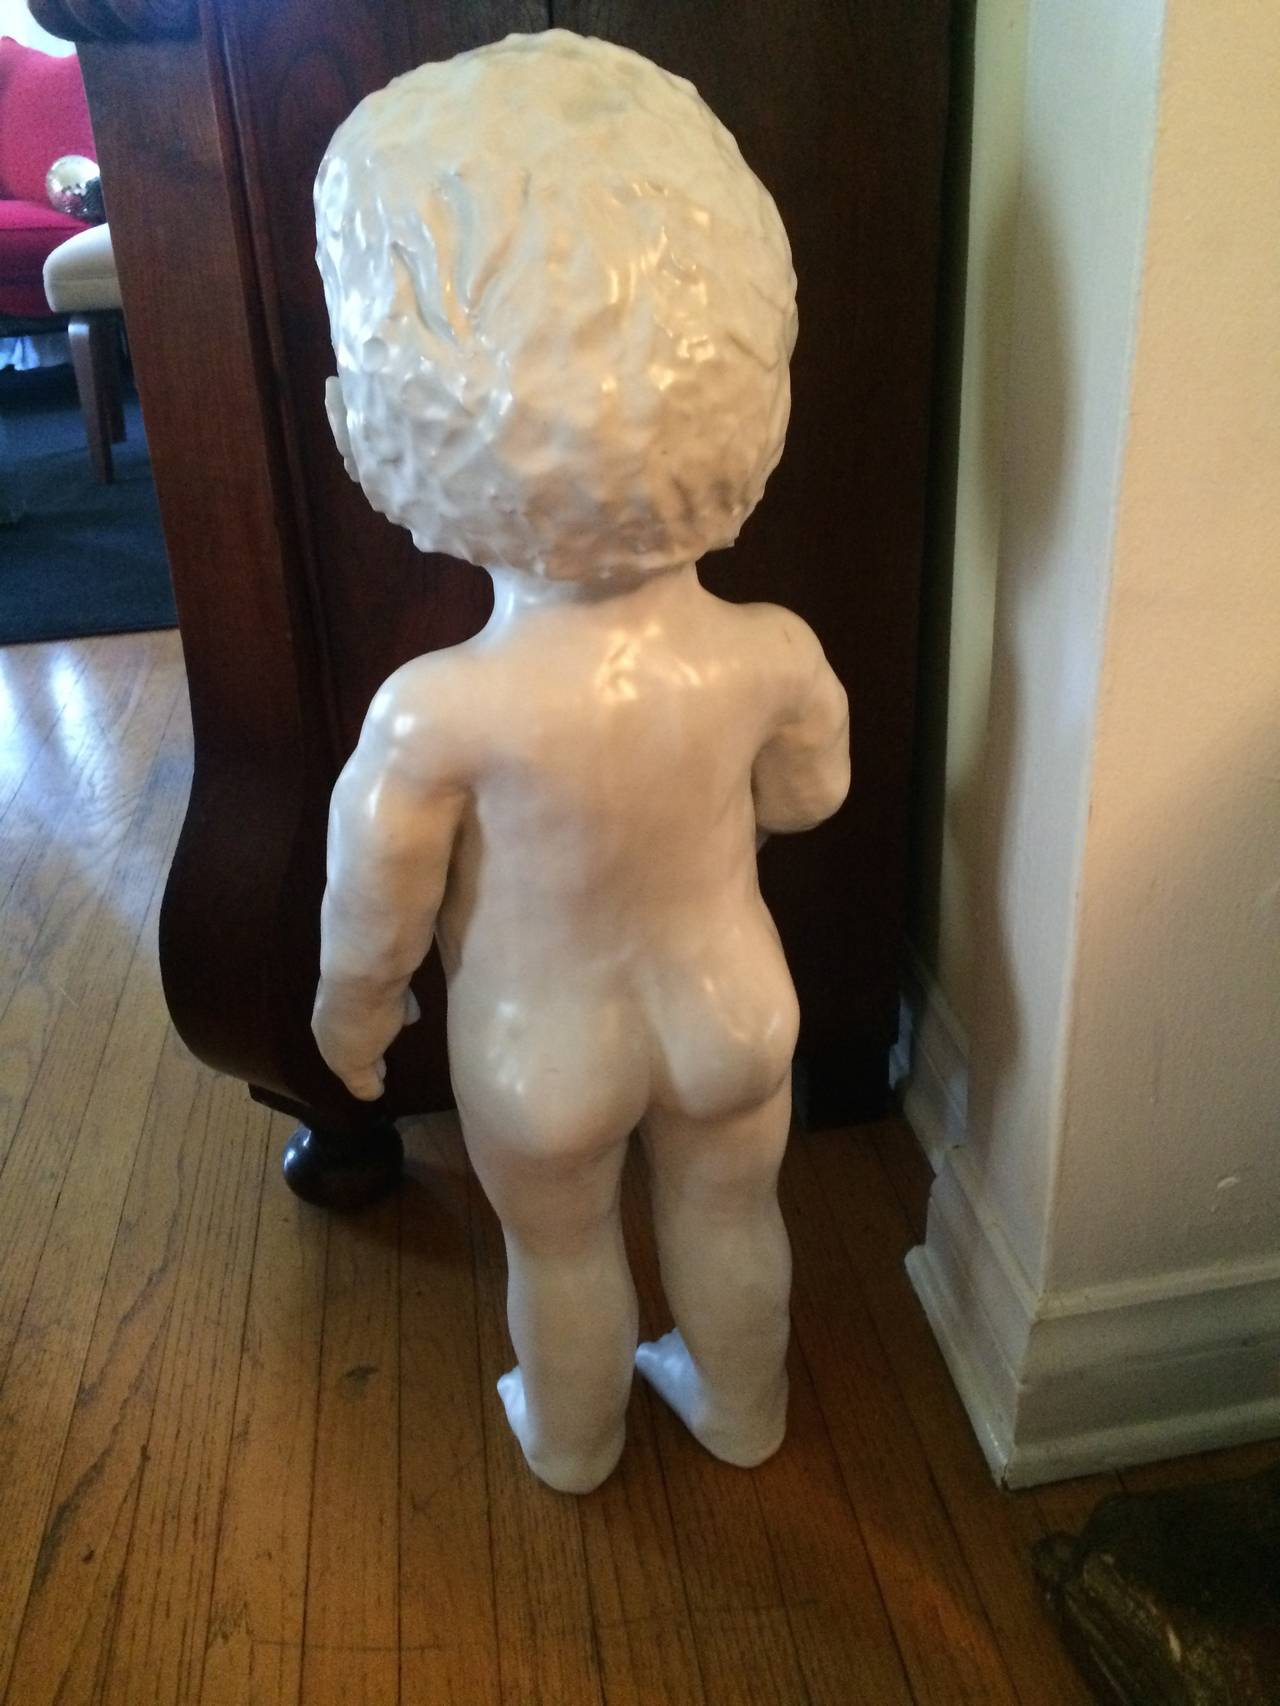 Life-sized porcelain figure of a boy stands on its own. A very heavy and substantial piece. An interesting idea for the garden!